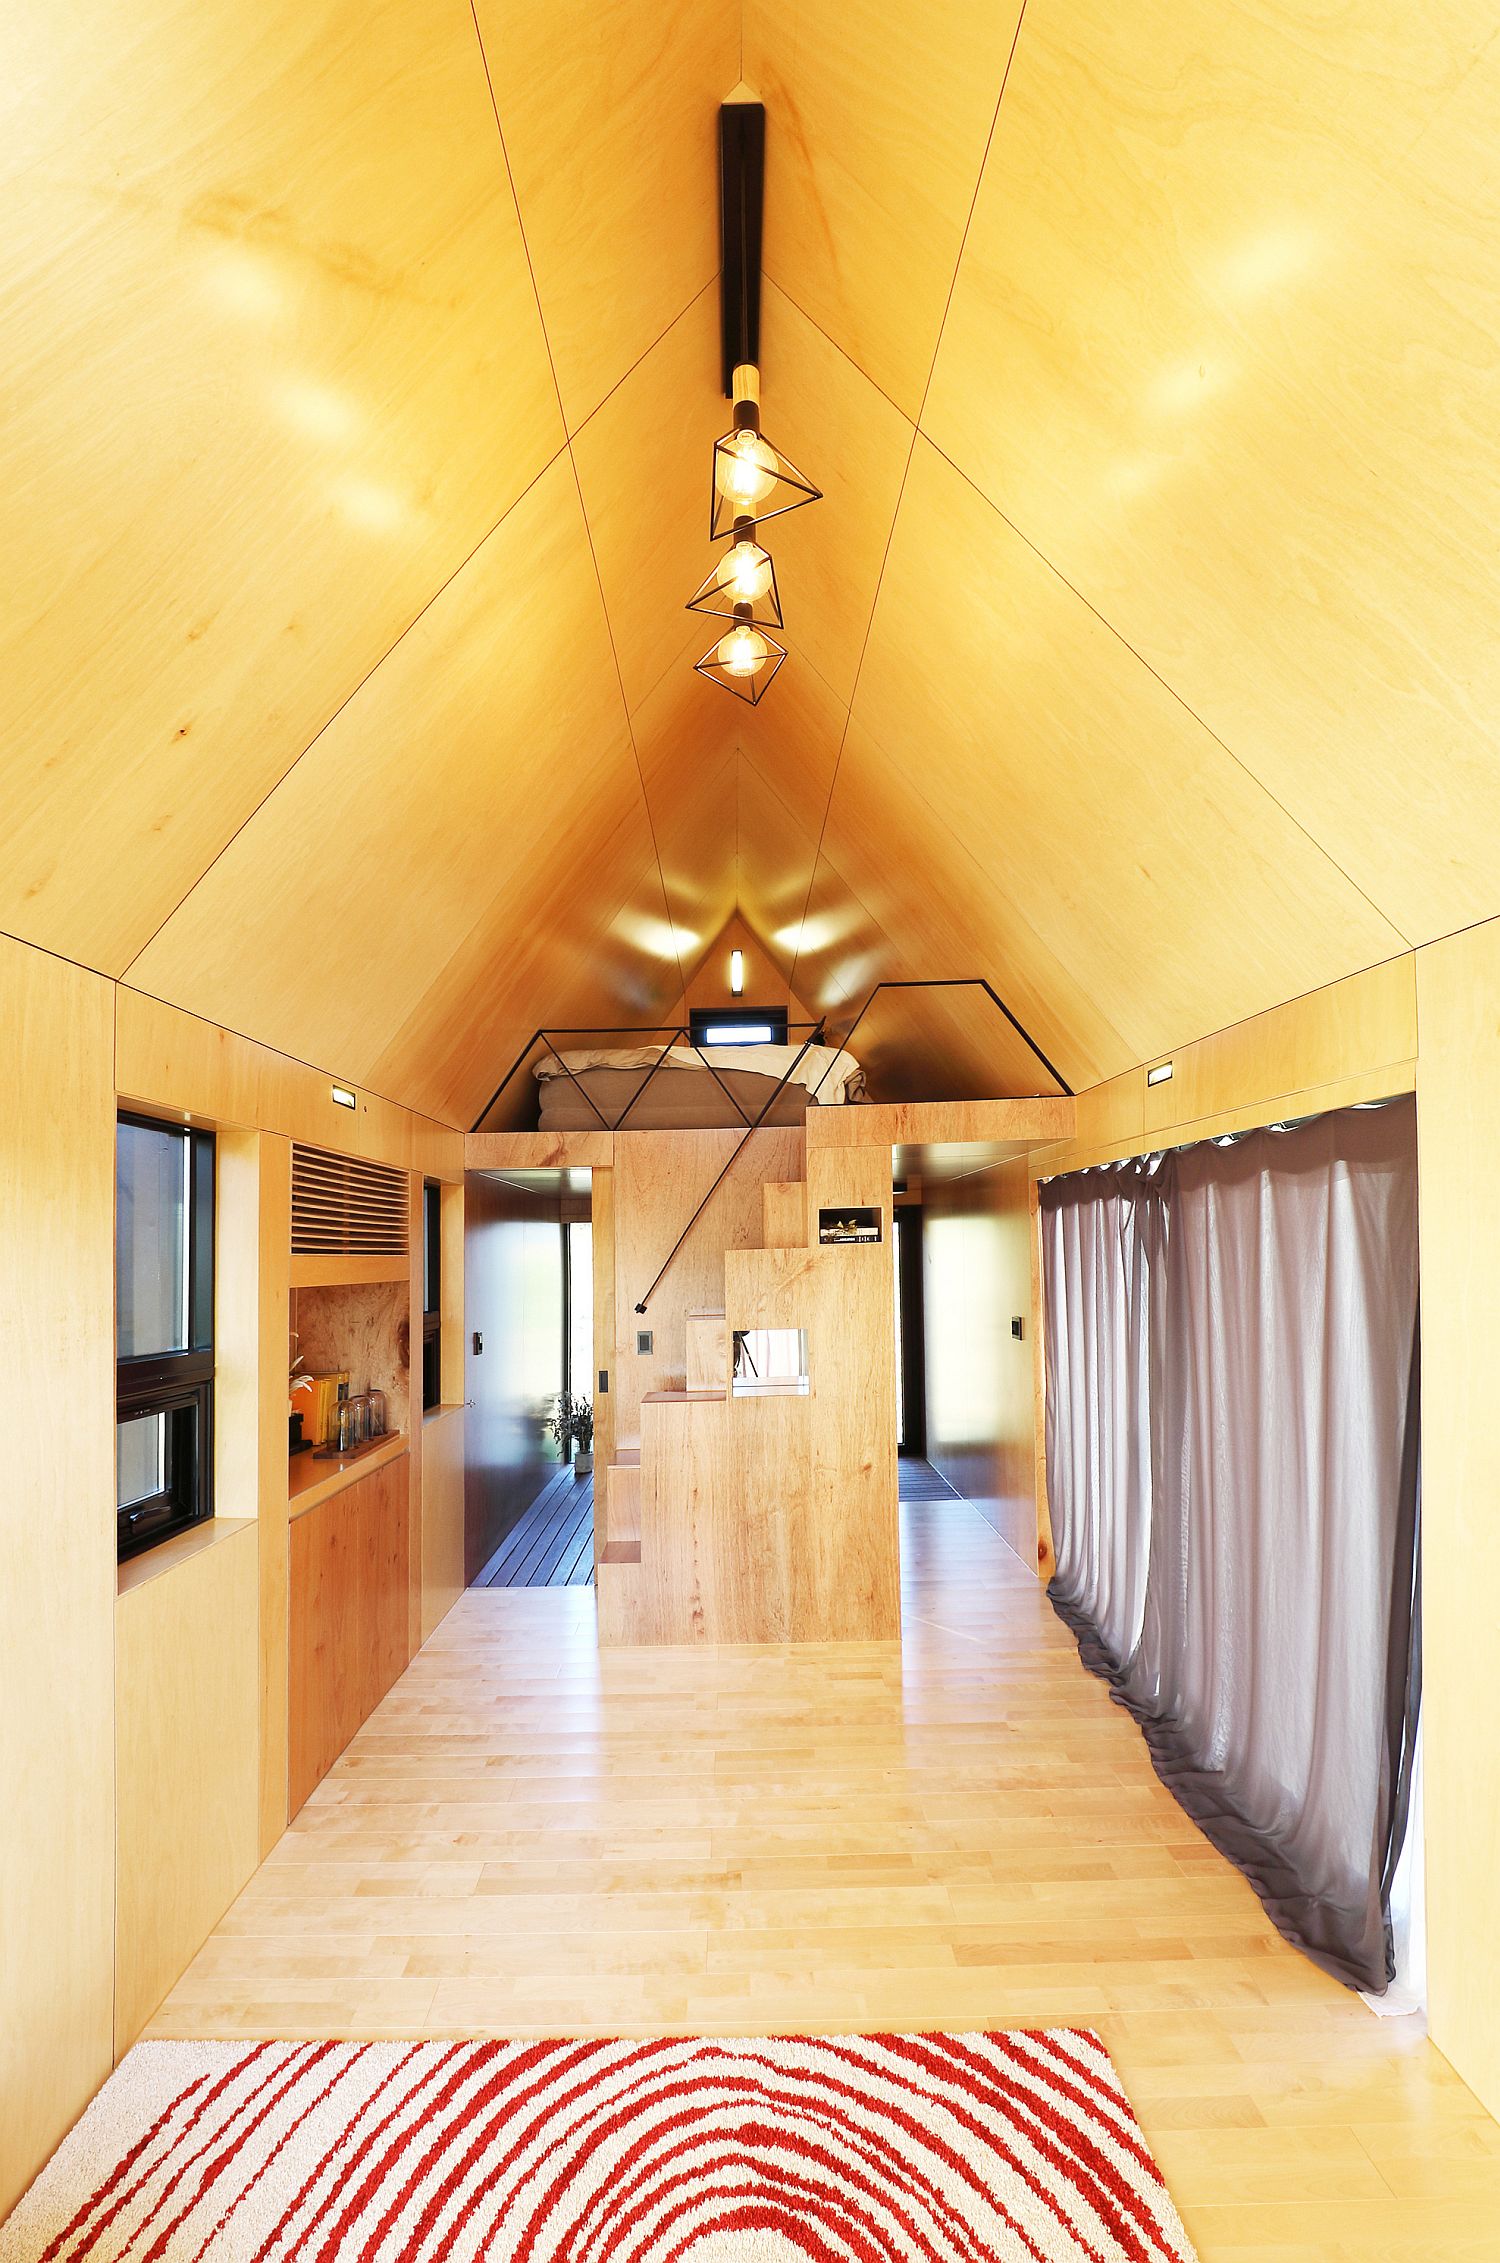 Lighting the tiny wooden cabin interior in style